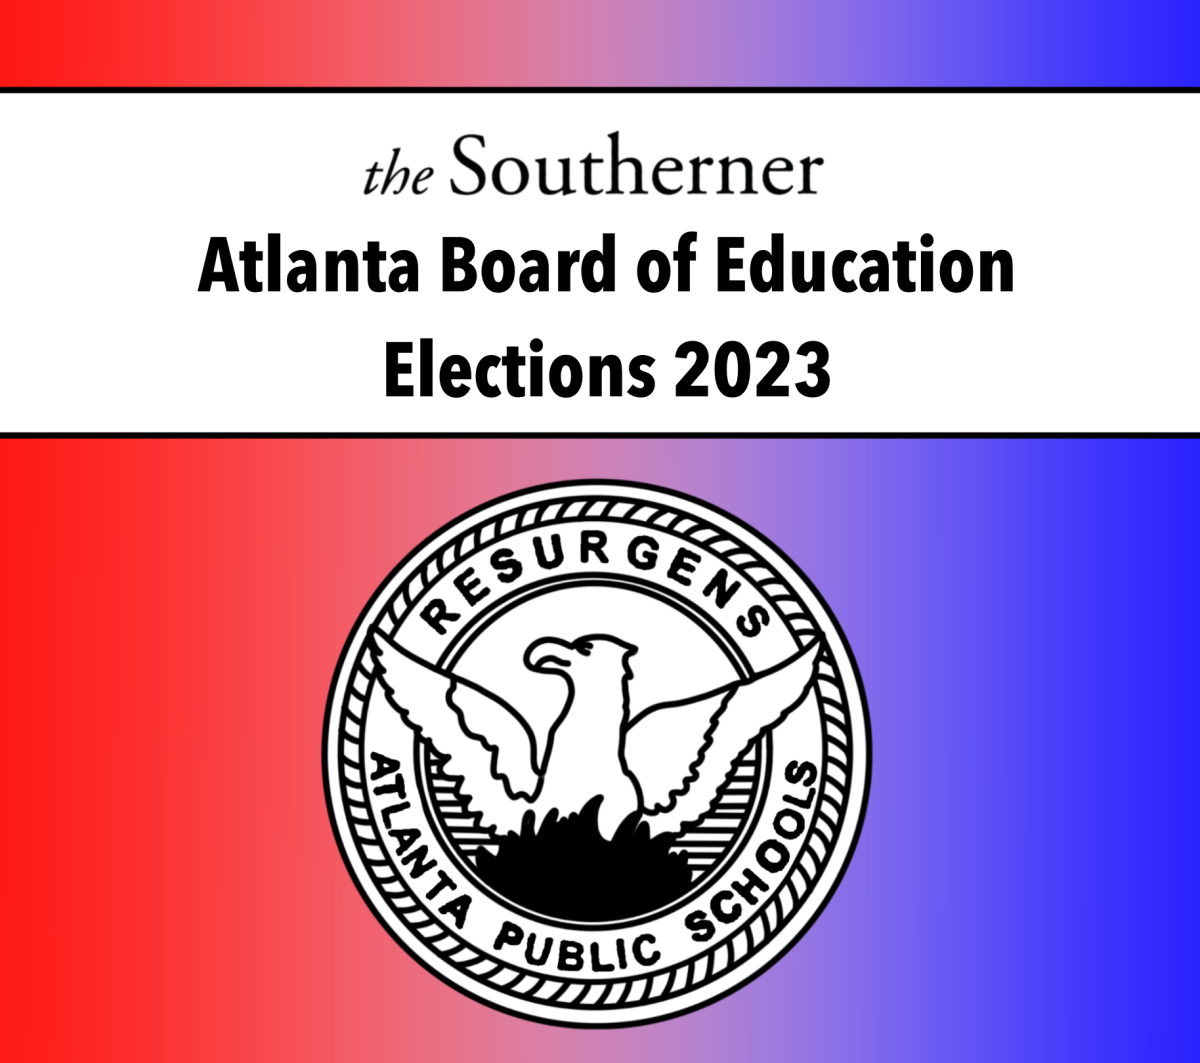 Two Midtown parents run for District 3 seat on Atlanta Board of Education